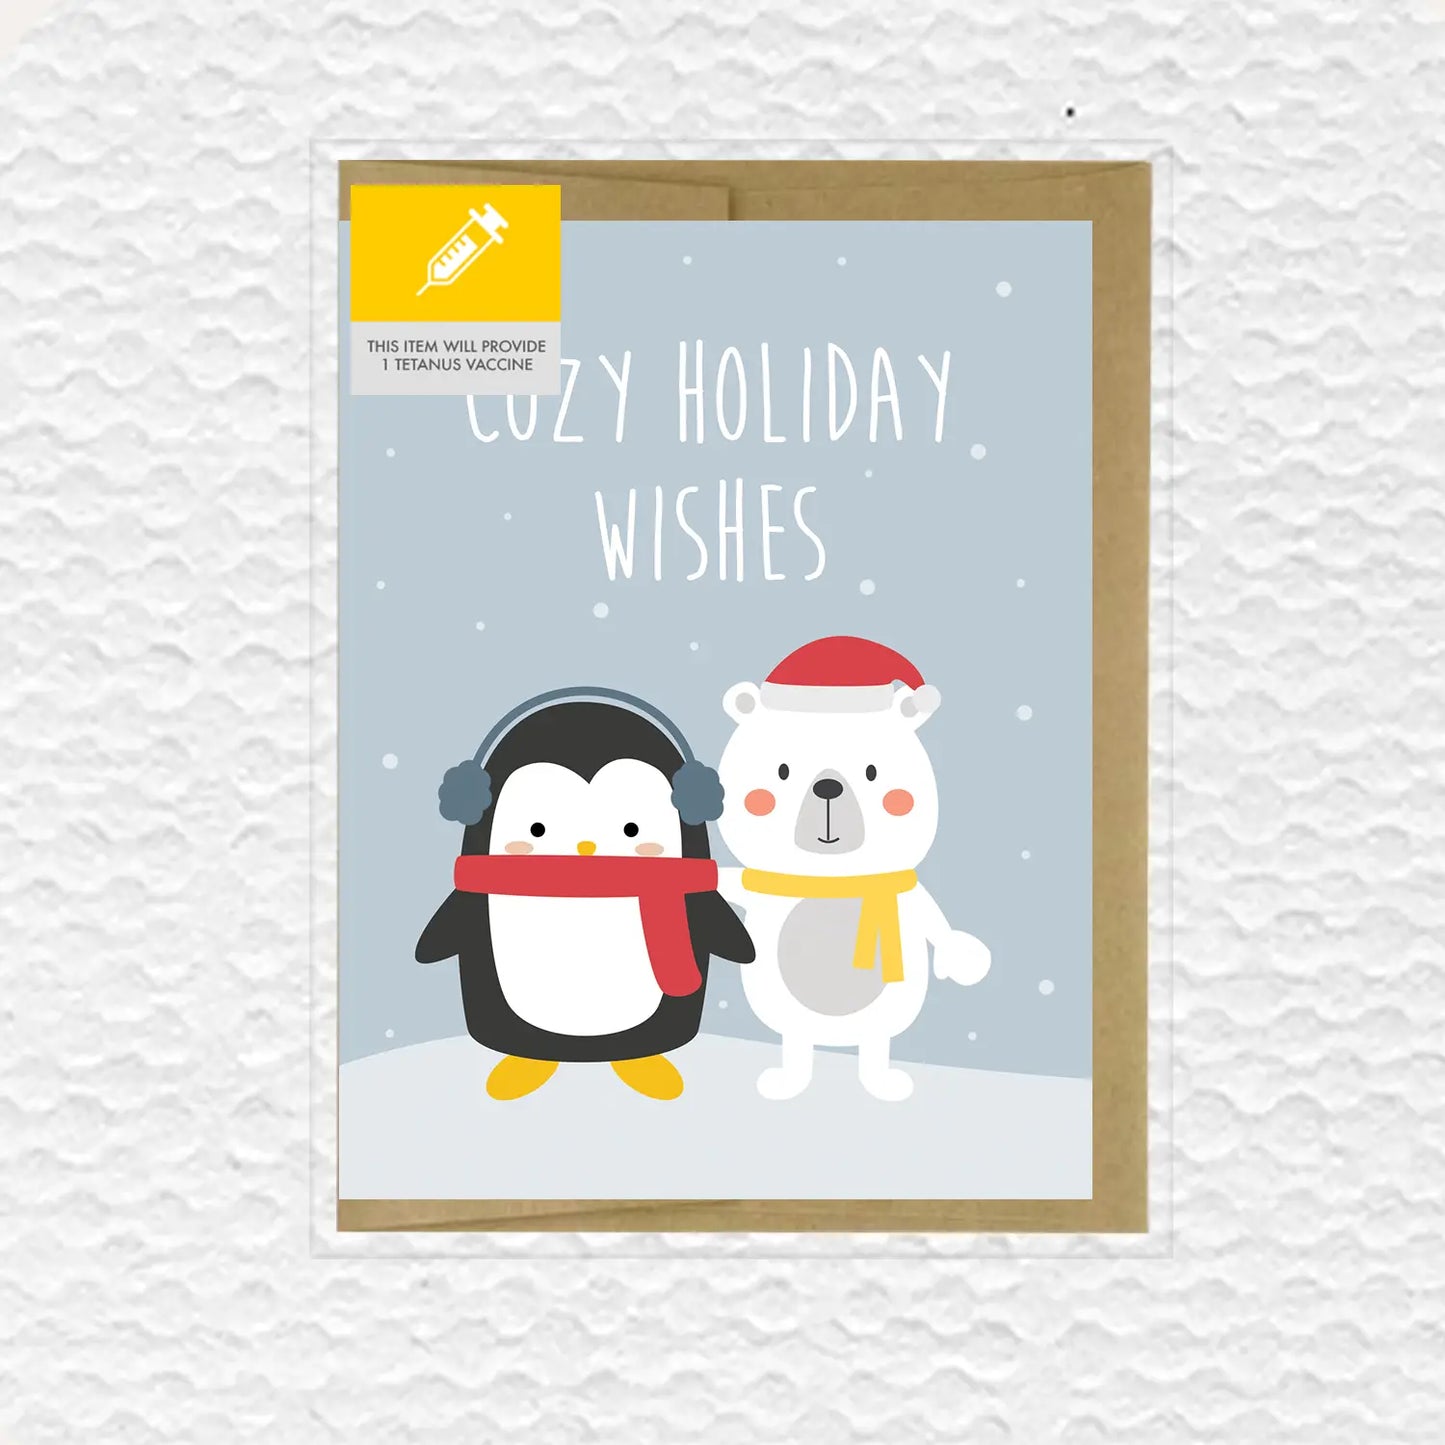 Cozy Holiday Wishes Greeting Card